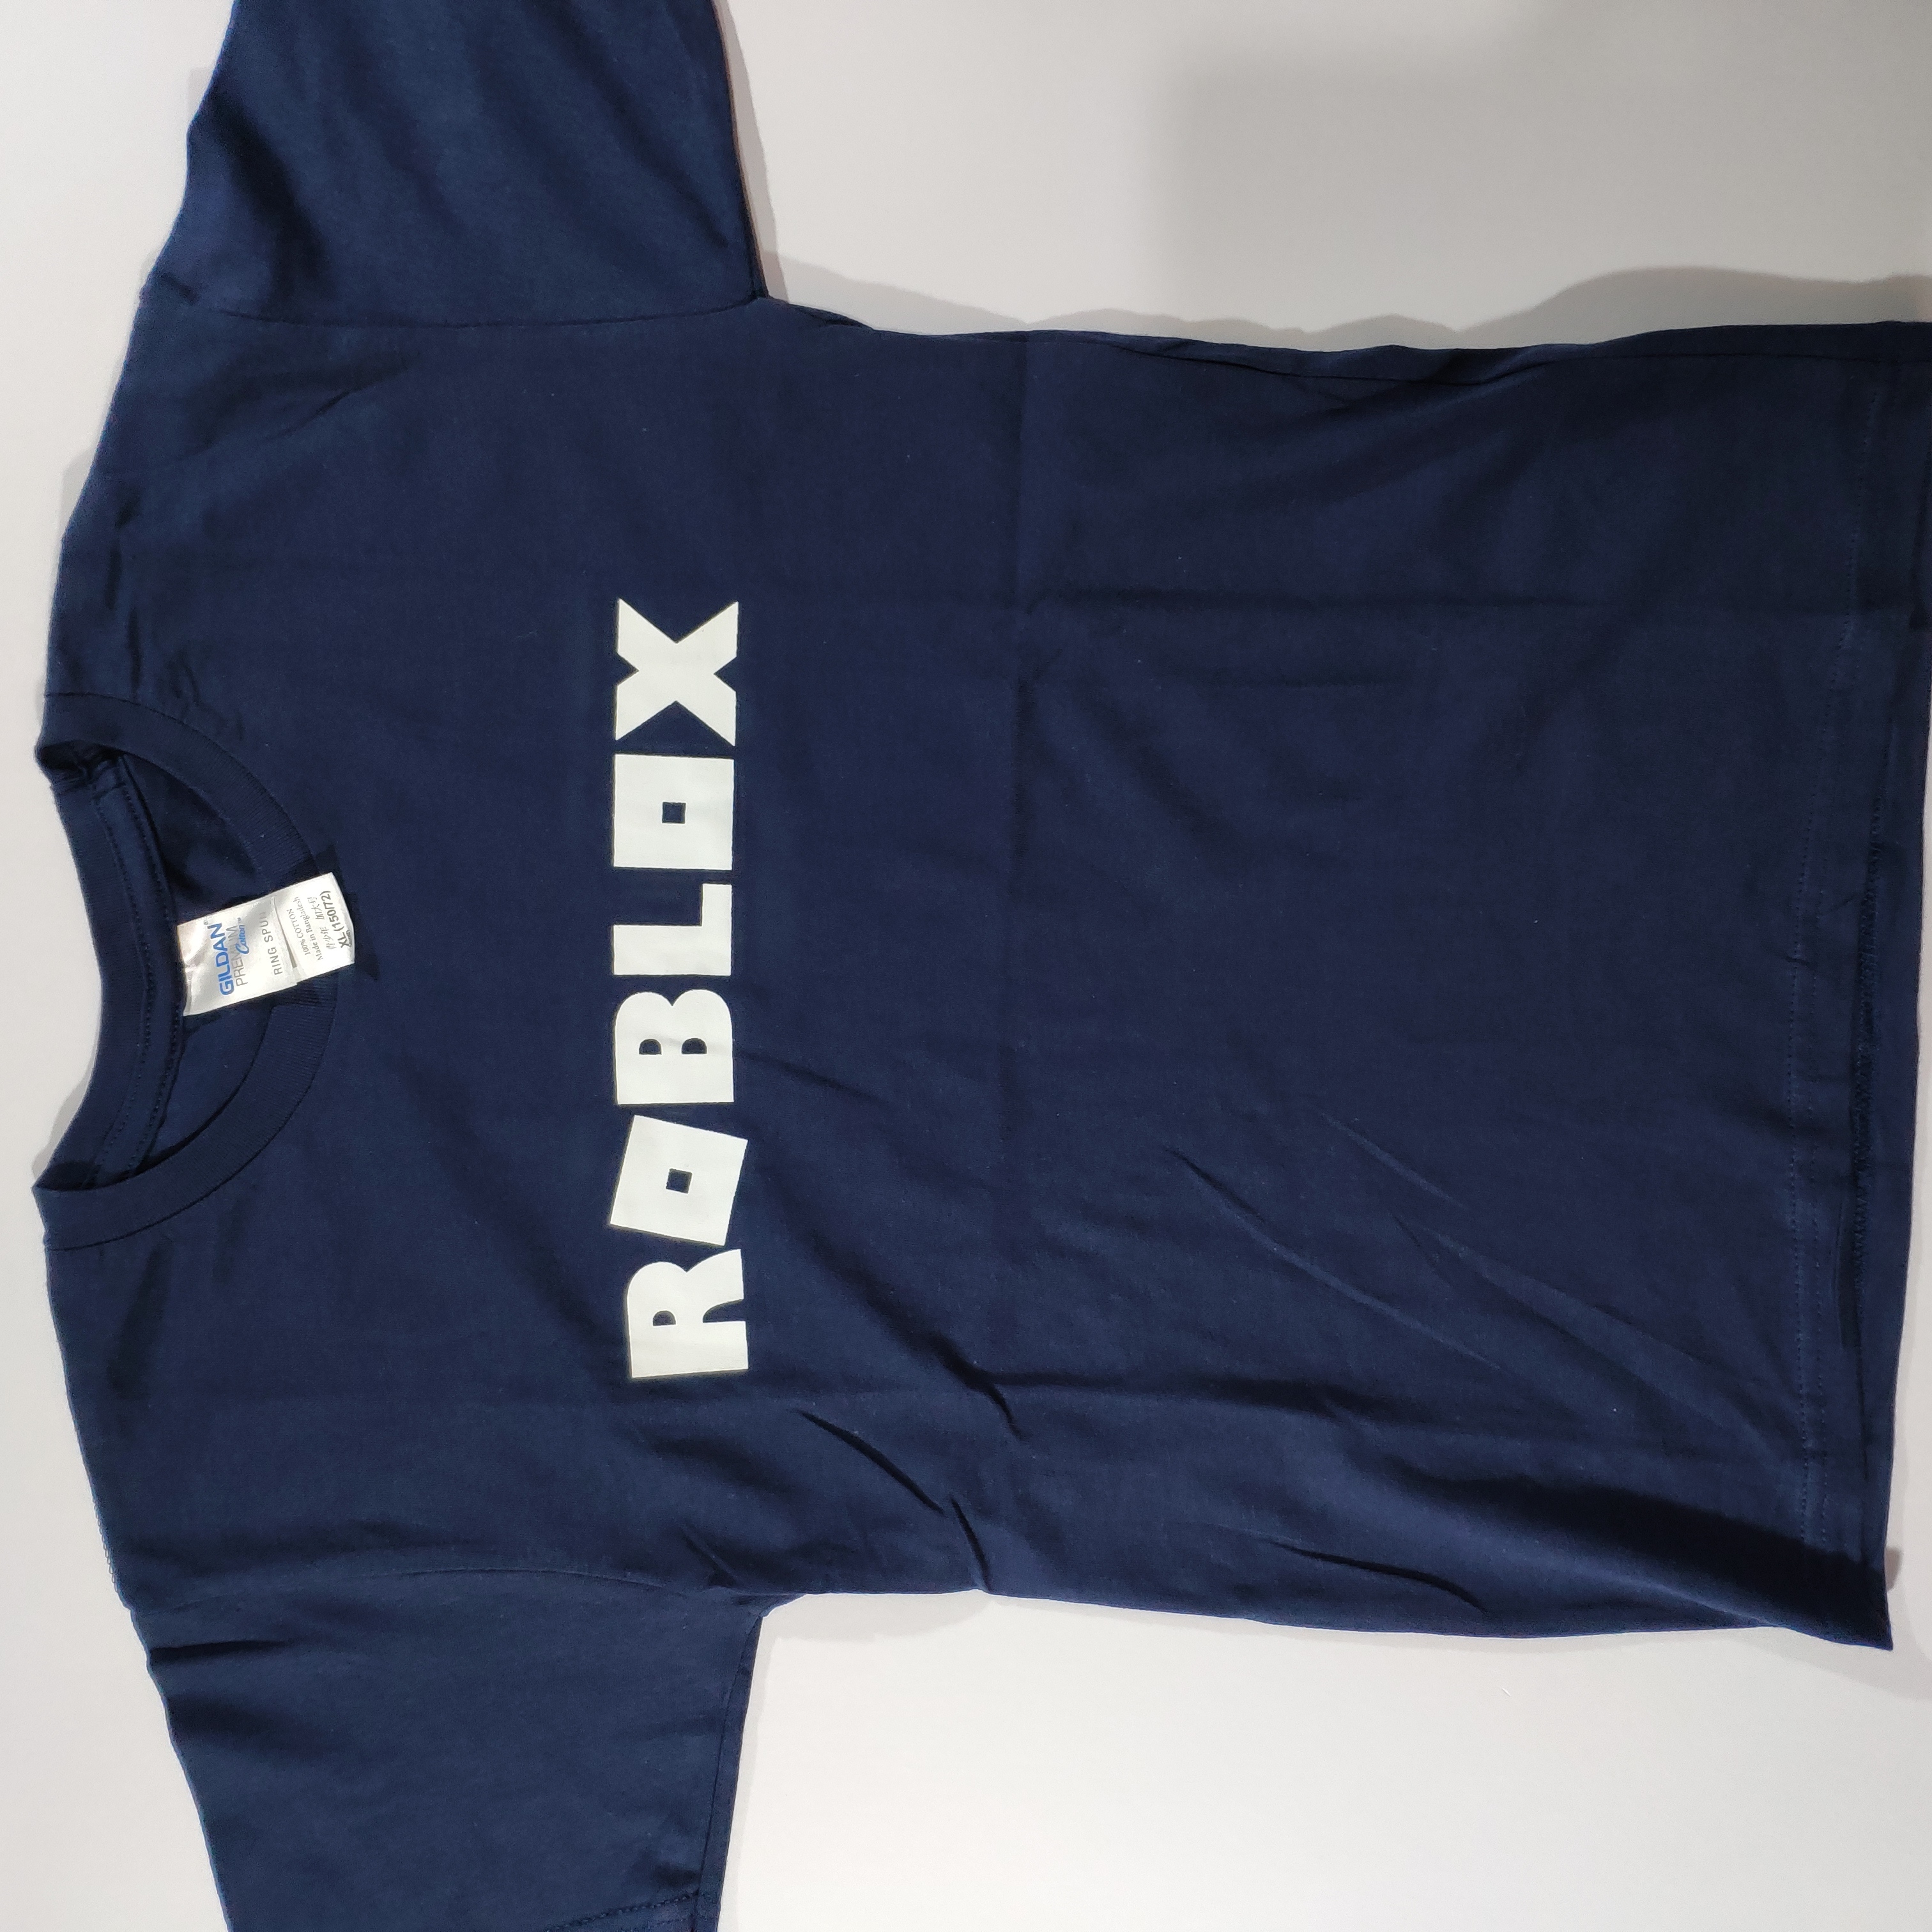 Roblox Kids T Shirt Buy Sell Online T Shirts Shirts With Cheap Price Lazada Ph - roblox kids clothing the best prices online in philippines